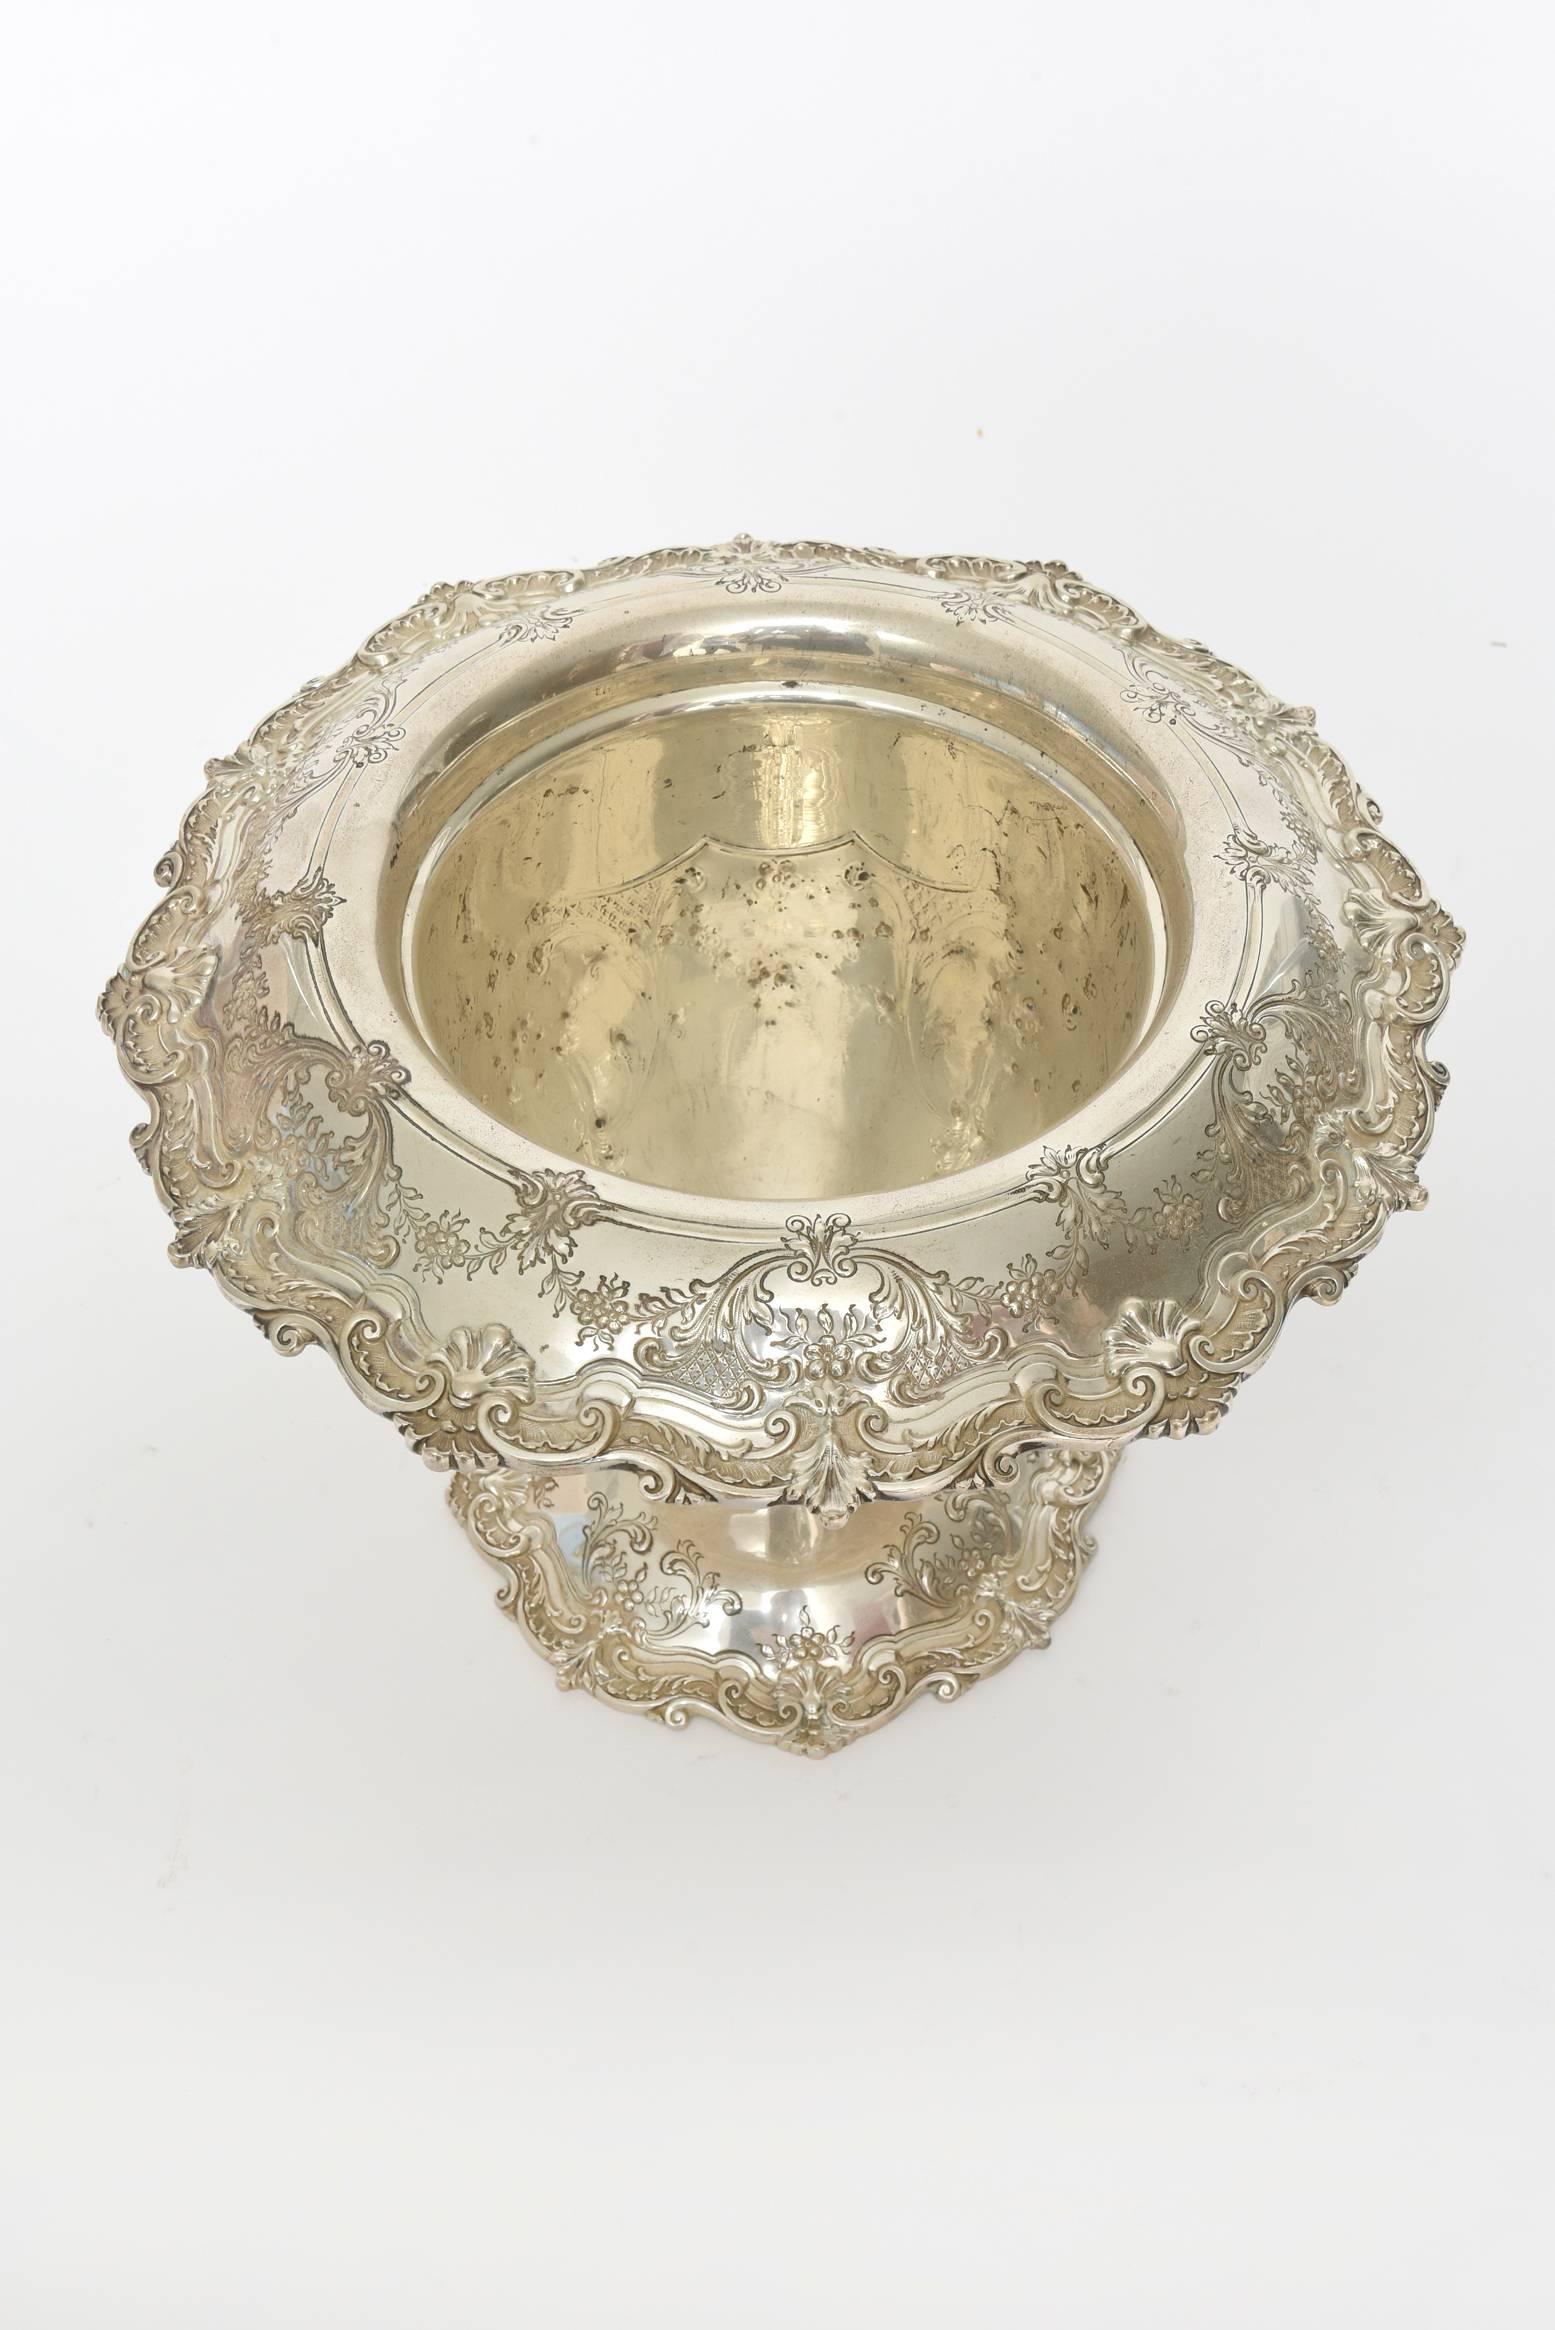 Ornate Graff, Washbourne & Dunn sterling silver champagne bucket (also could be used as a vase or centerpiece) features scalloped foot and rim. The piece is decorated with leaf and flower scroll wreaths and garlands as well as flowers against a